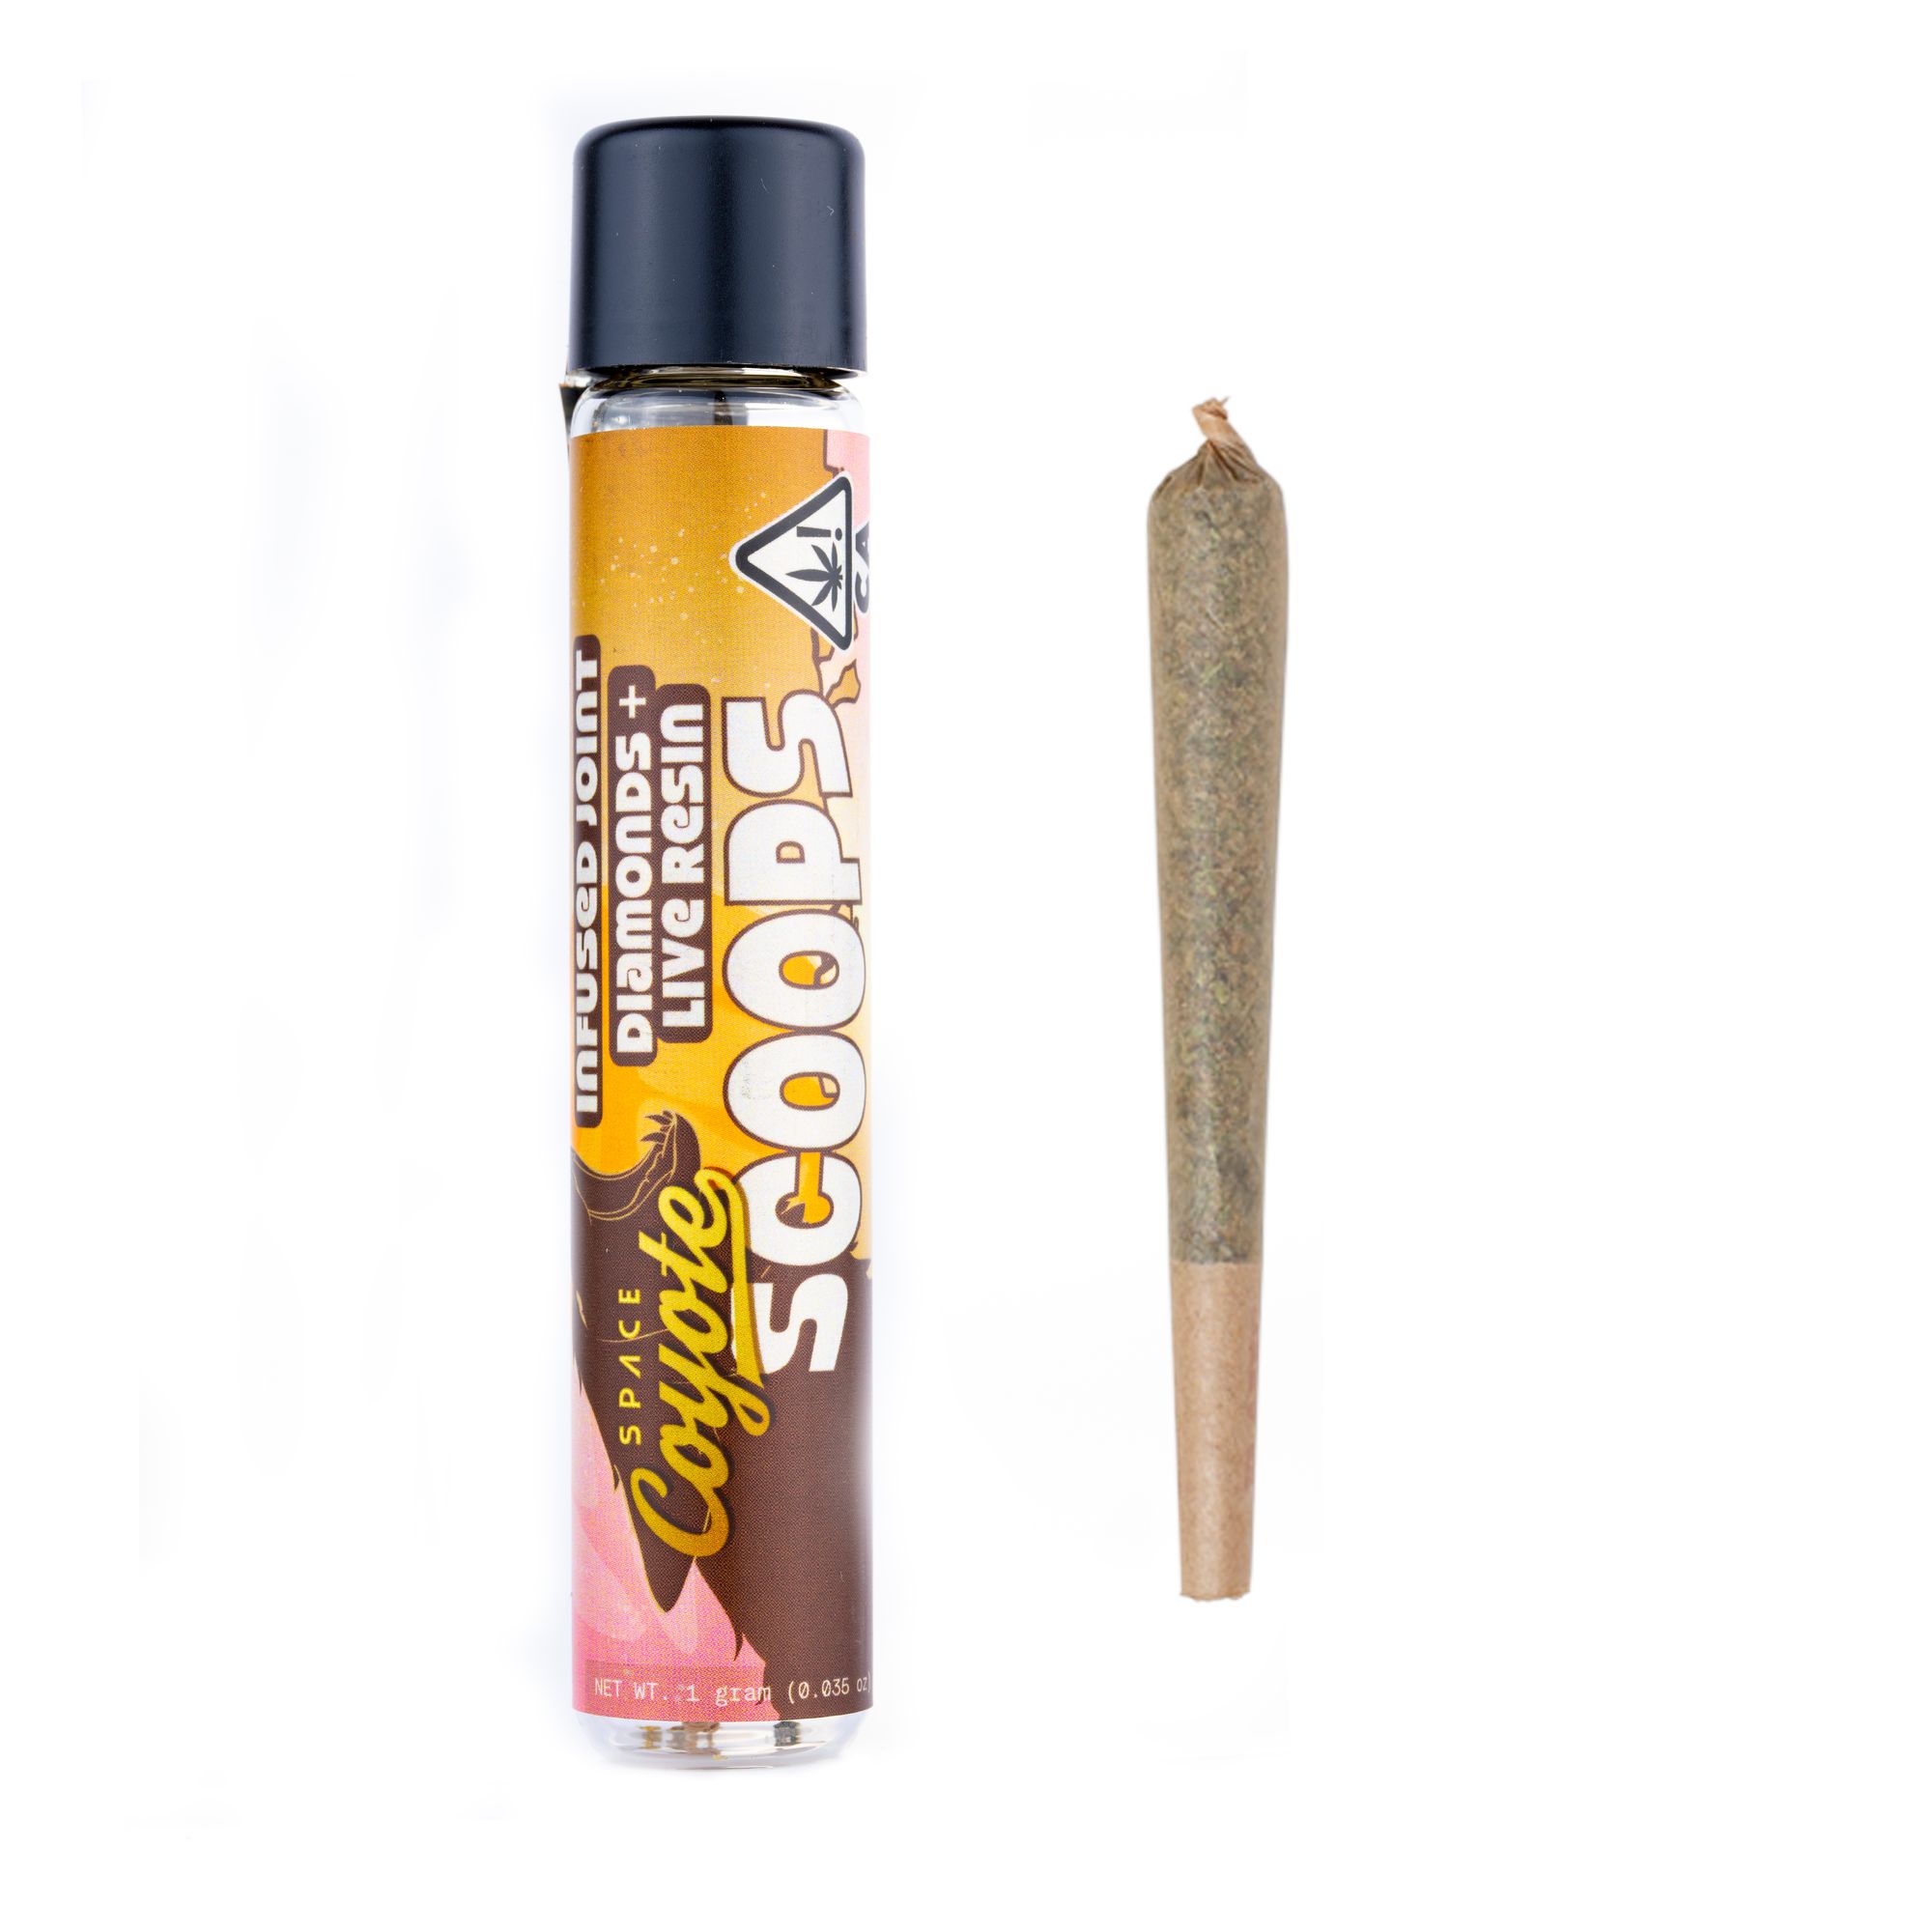 Scoops Diamond and Live Resin Infused Pre-Roll